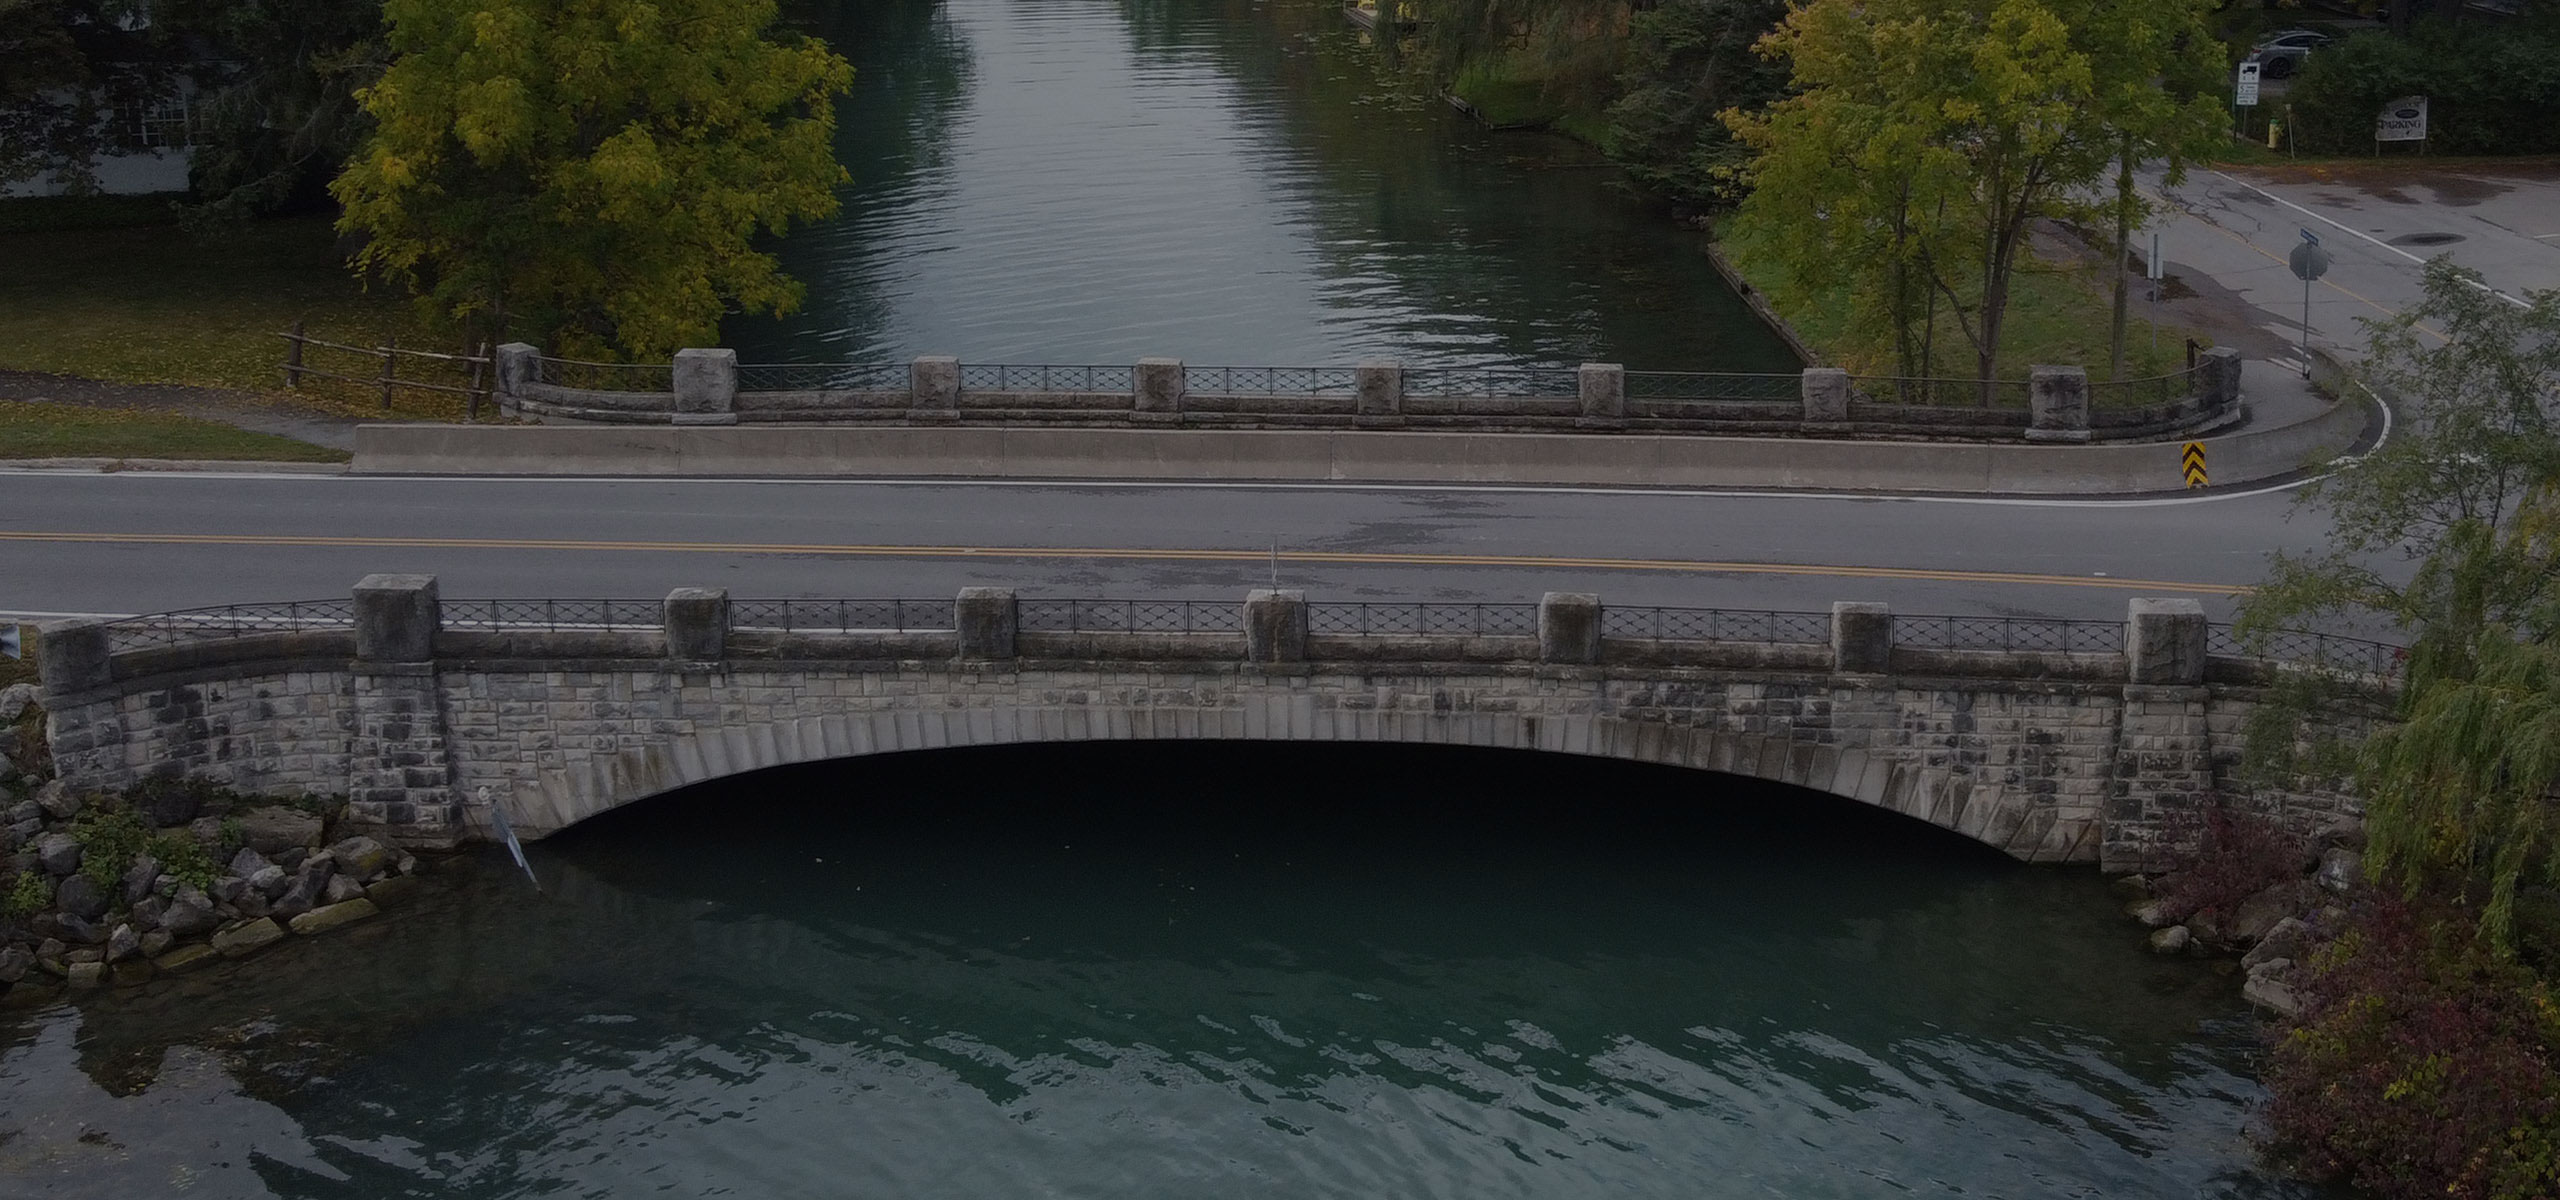 Niagara Parks Invests over $3 million for Black Creek Bridge Replacement